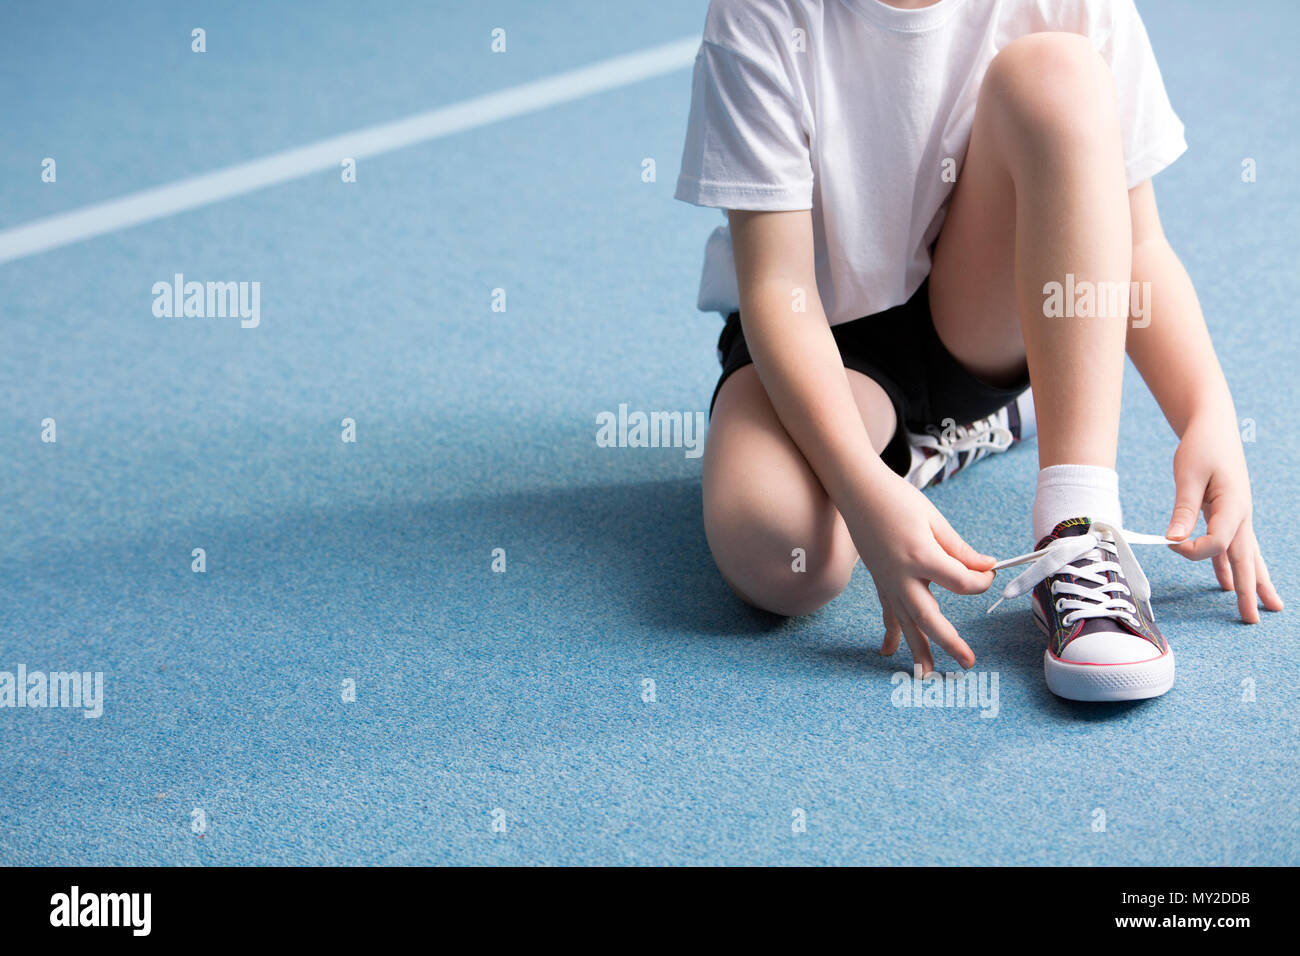 Close-up of kid tying a shoe on blue floor at the gym Stock Photo